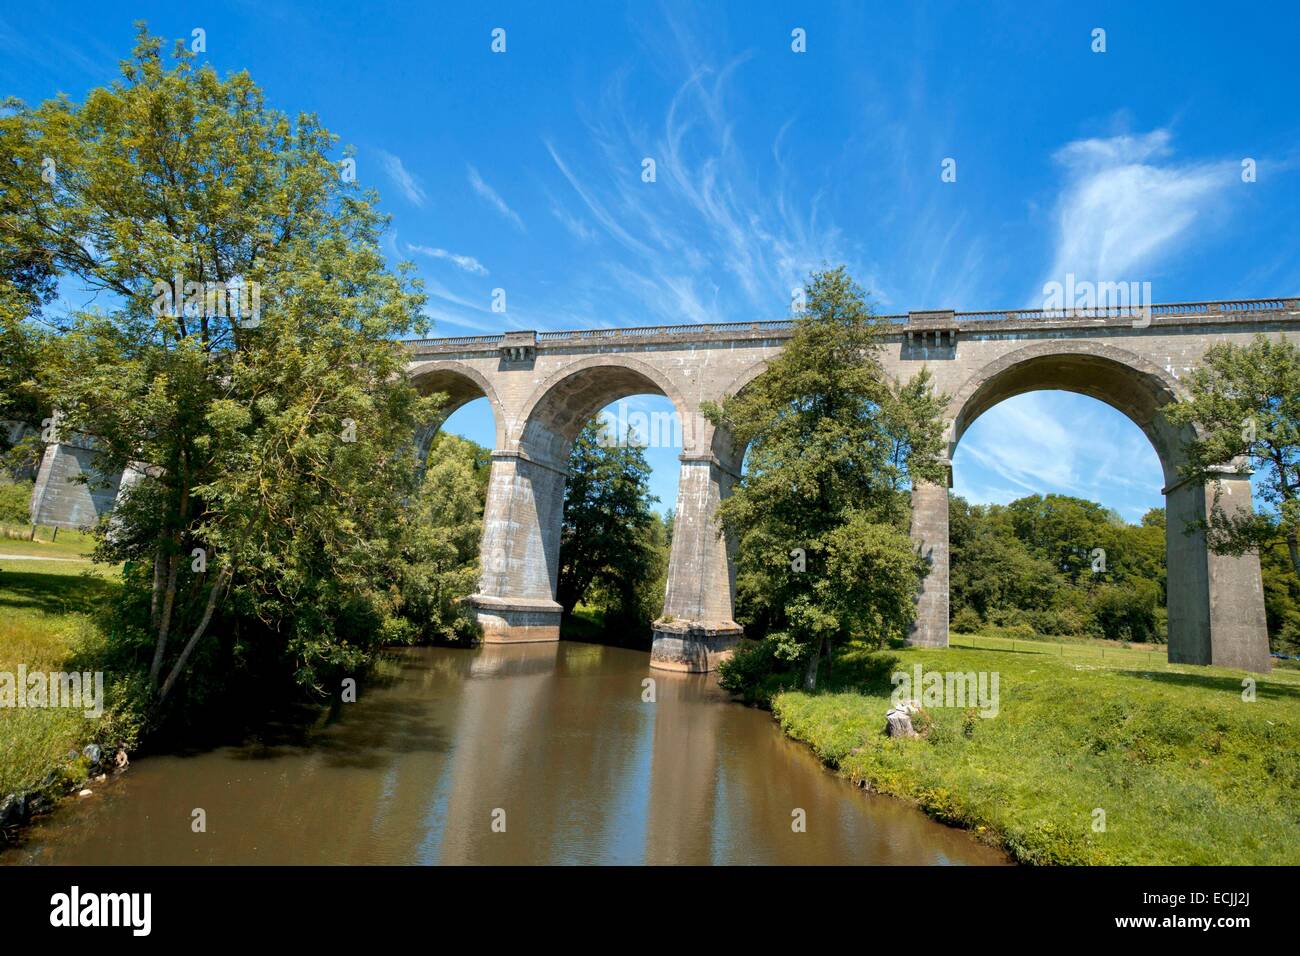 France, Aisne, Ohis, Ohis viaduct over the Oise river Stock Photo